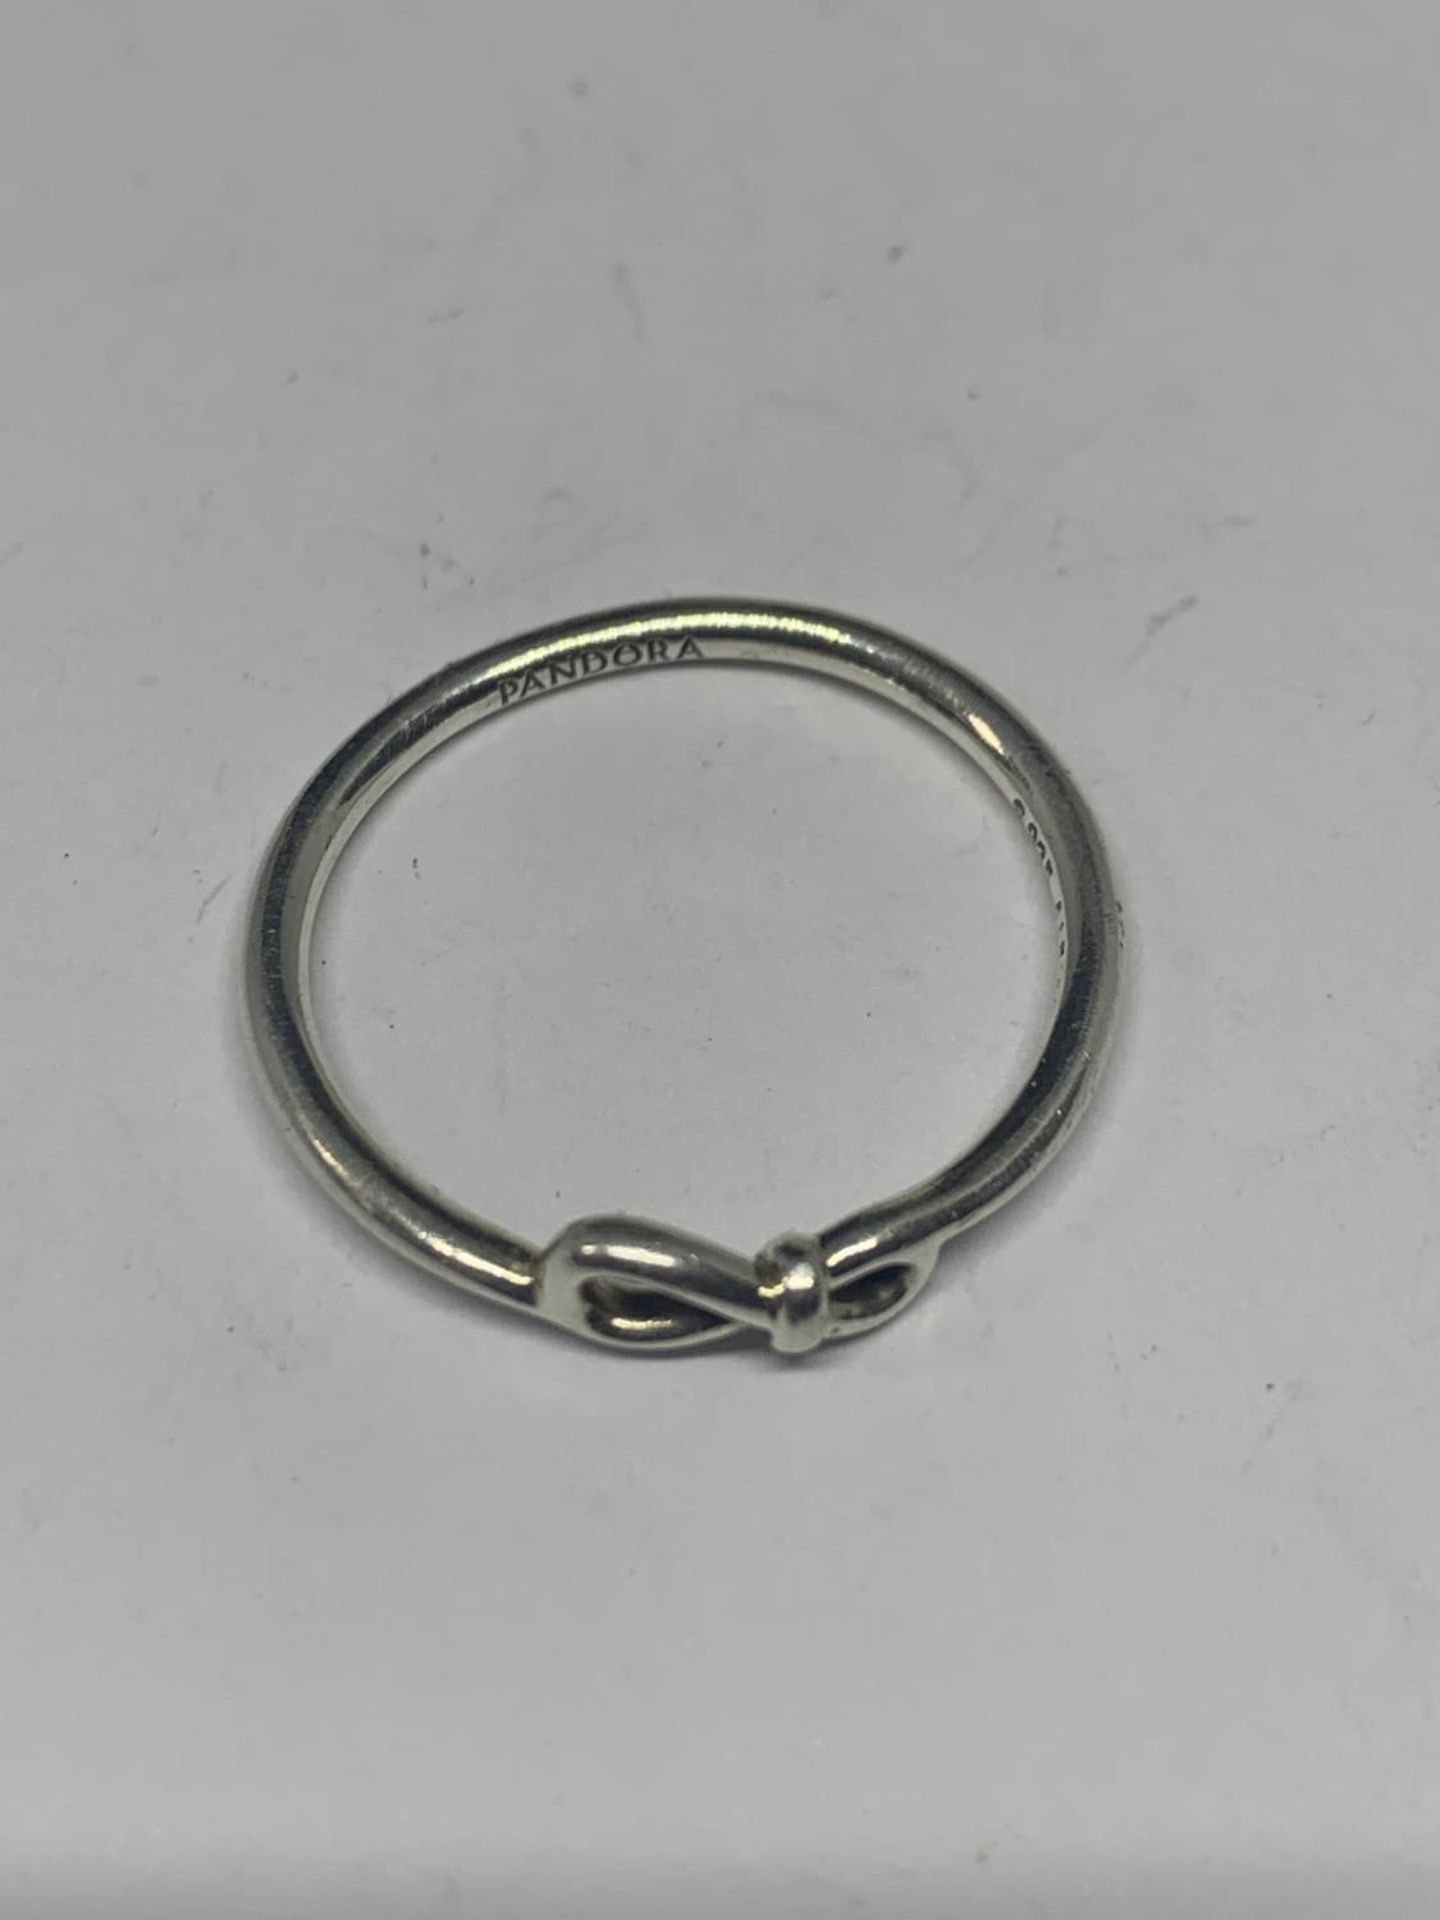 A BOXED PANDORA SILVER RING SIZE S - Image 4 of 6